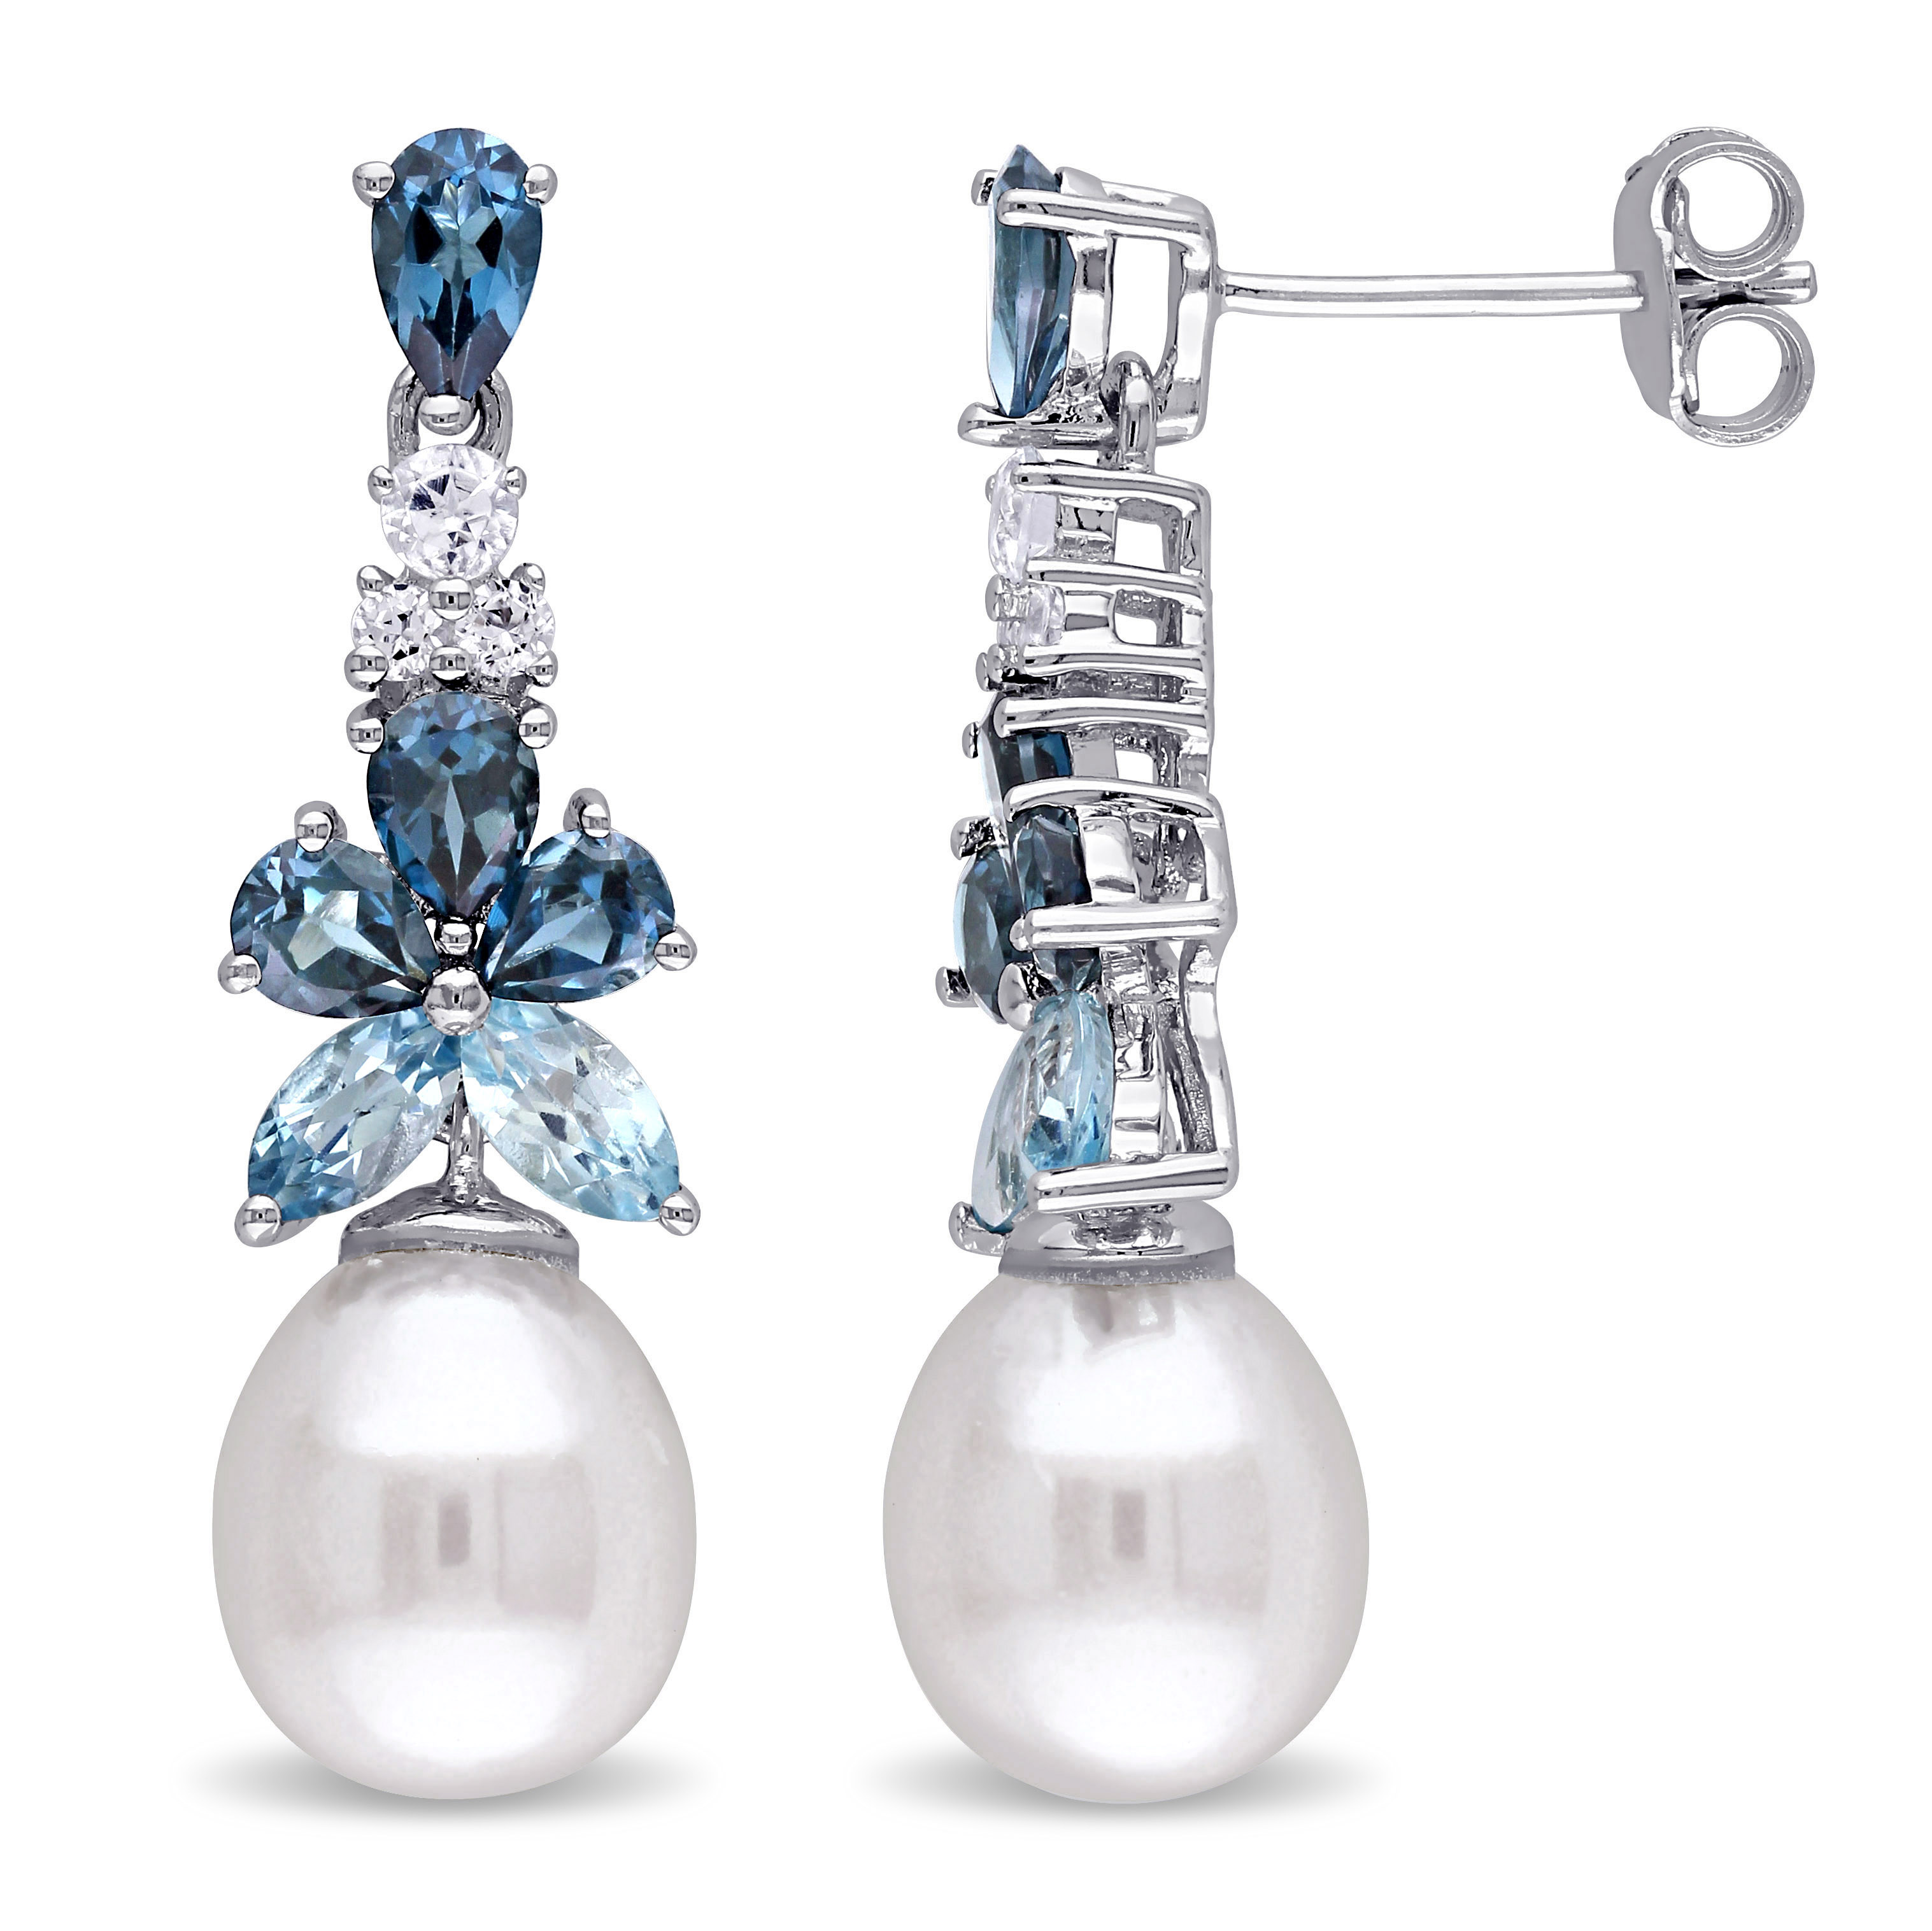 8.5 - 9 MM White Cultured Freshwater Pearl and London, Sky Blue and White Topaz Drop Earrings in Sterling Silver